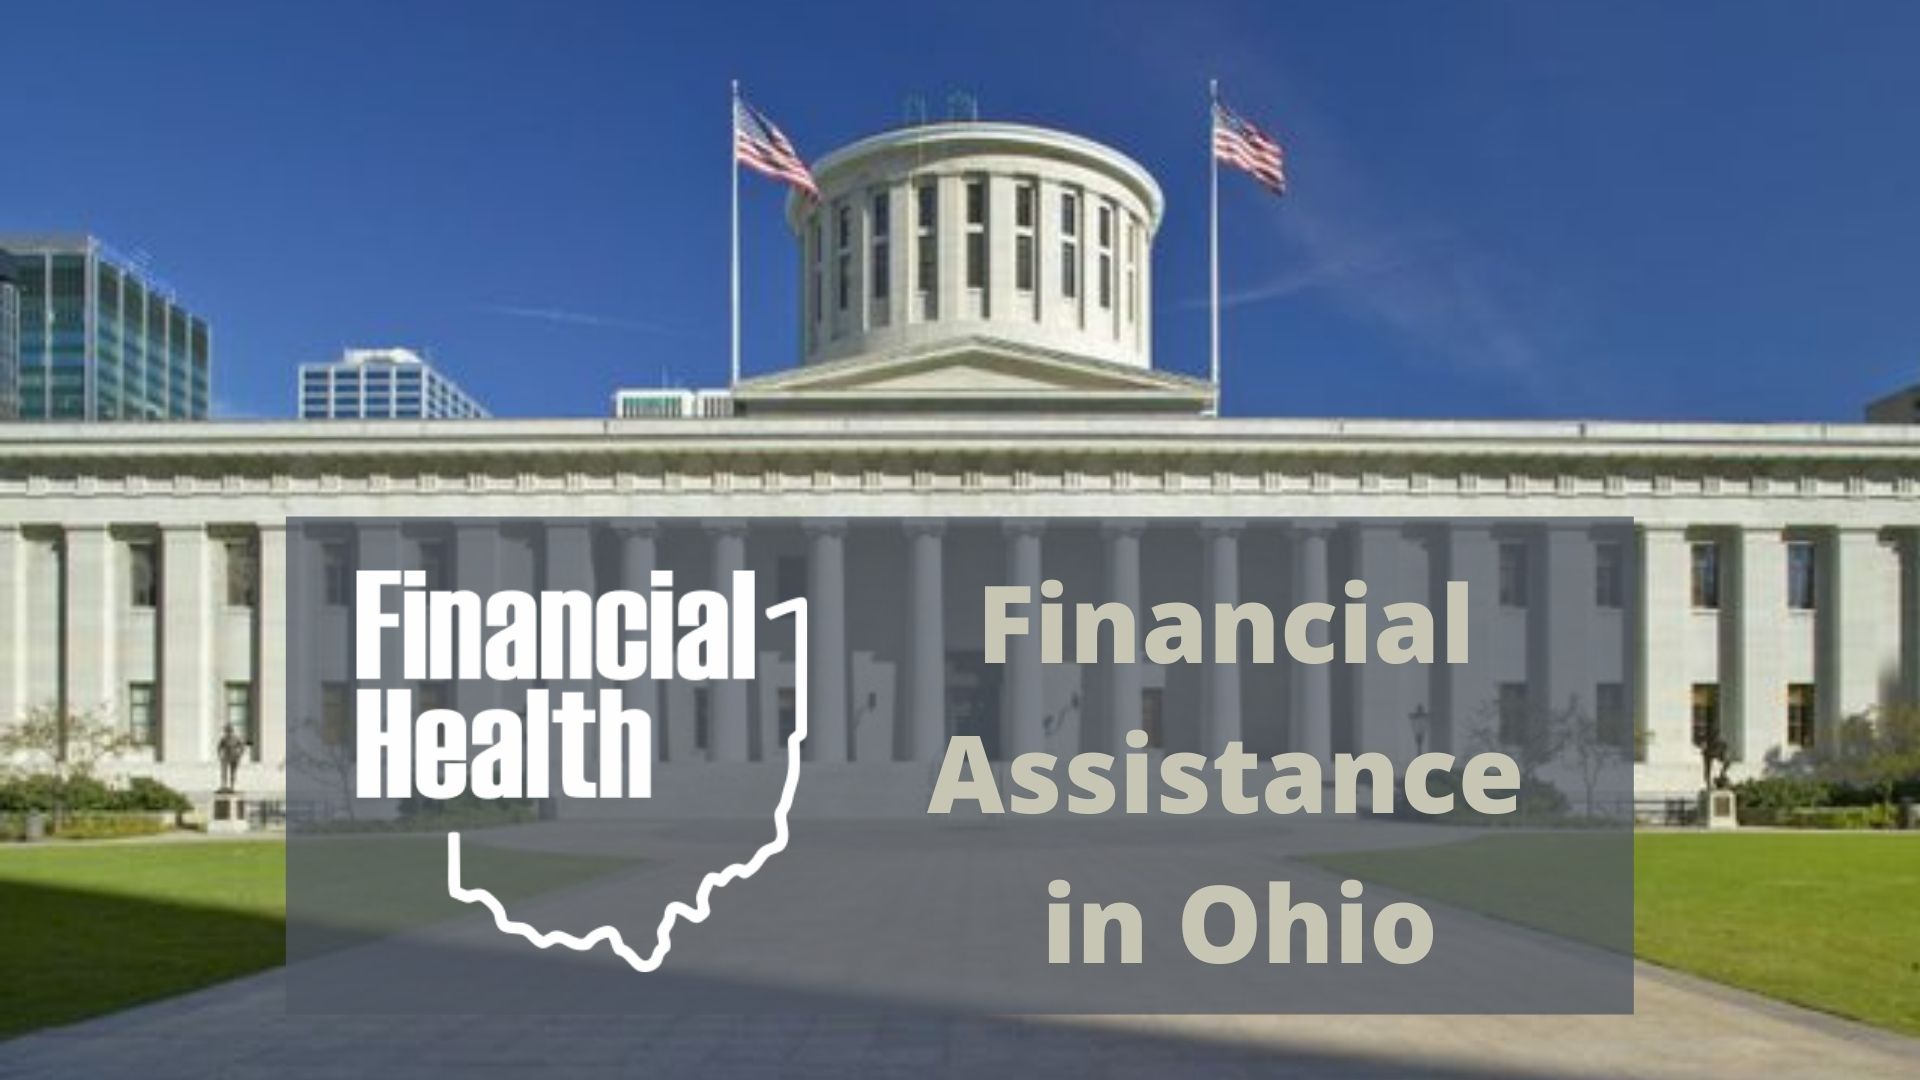 Financial Assistance Ohio Financial Health of Ohio Residents